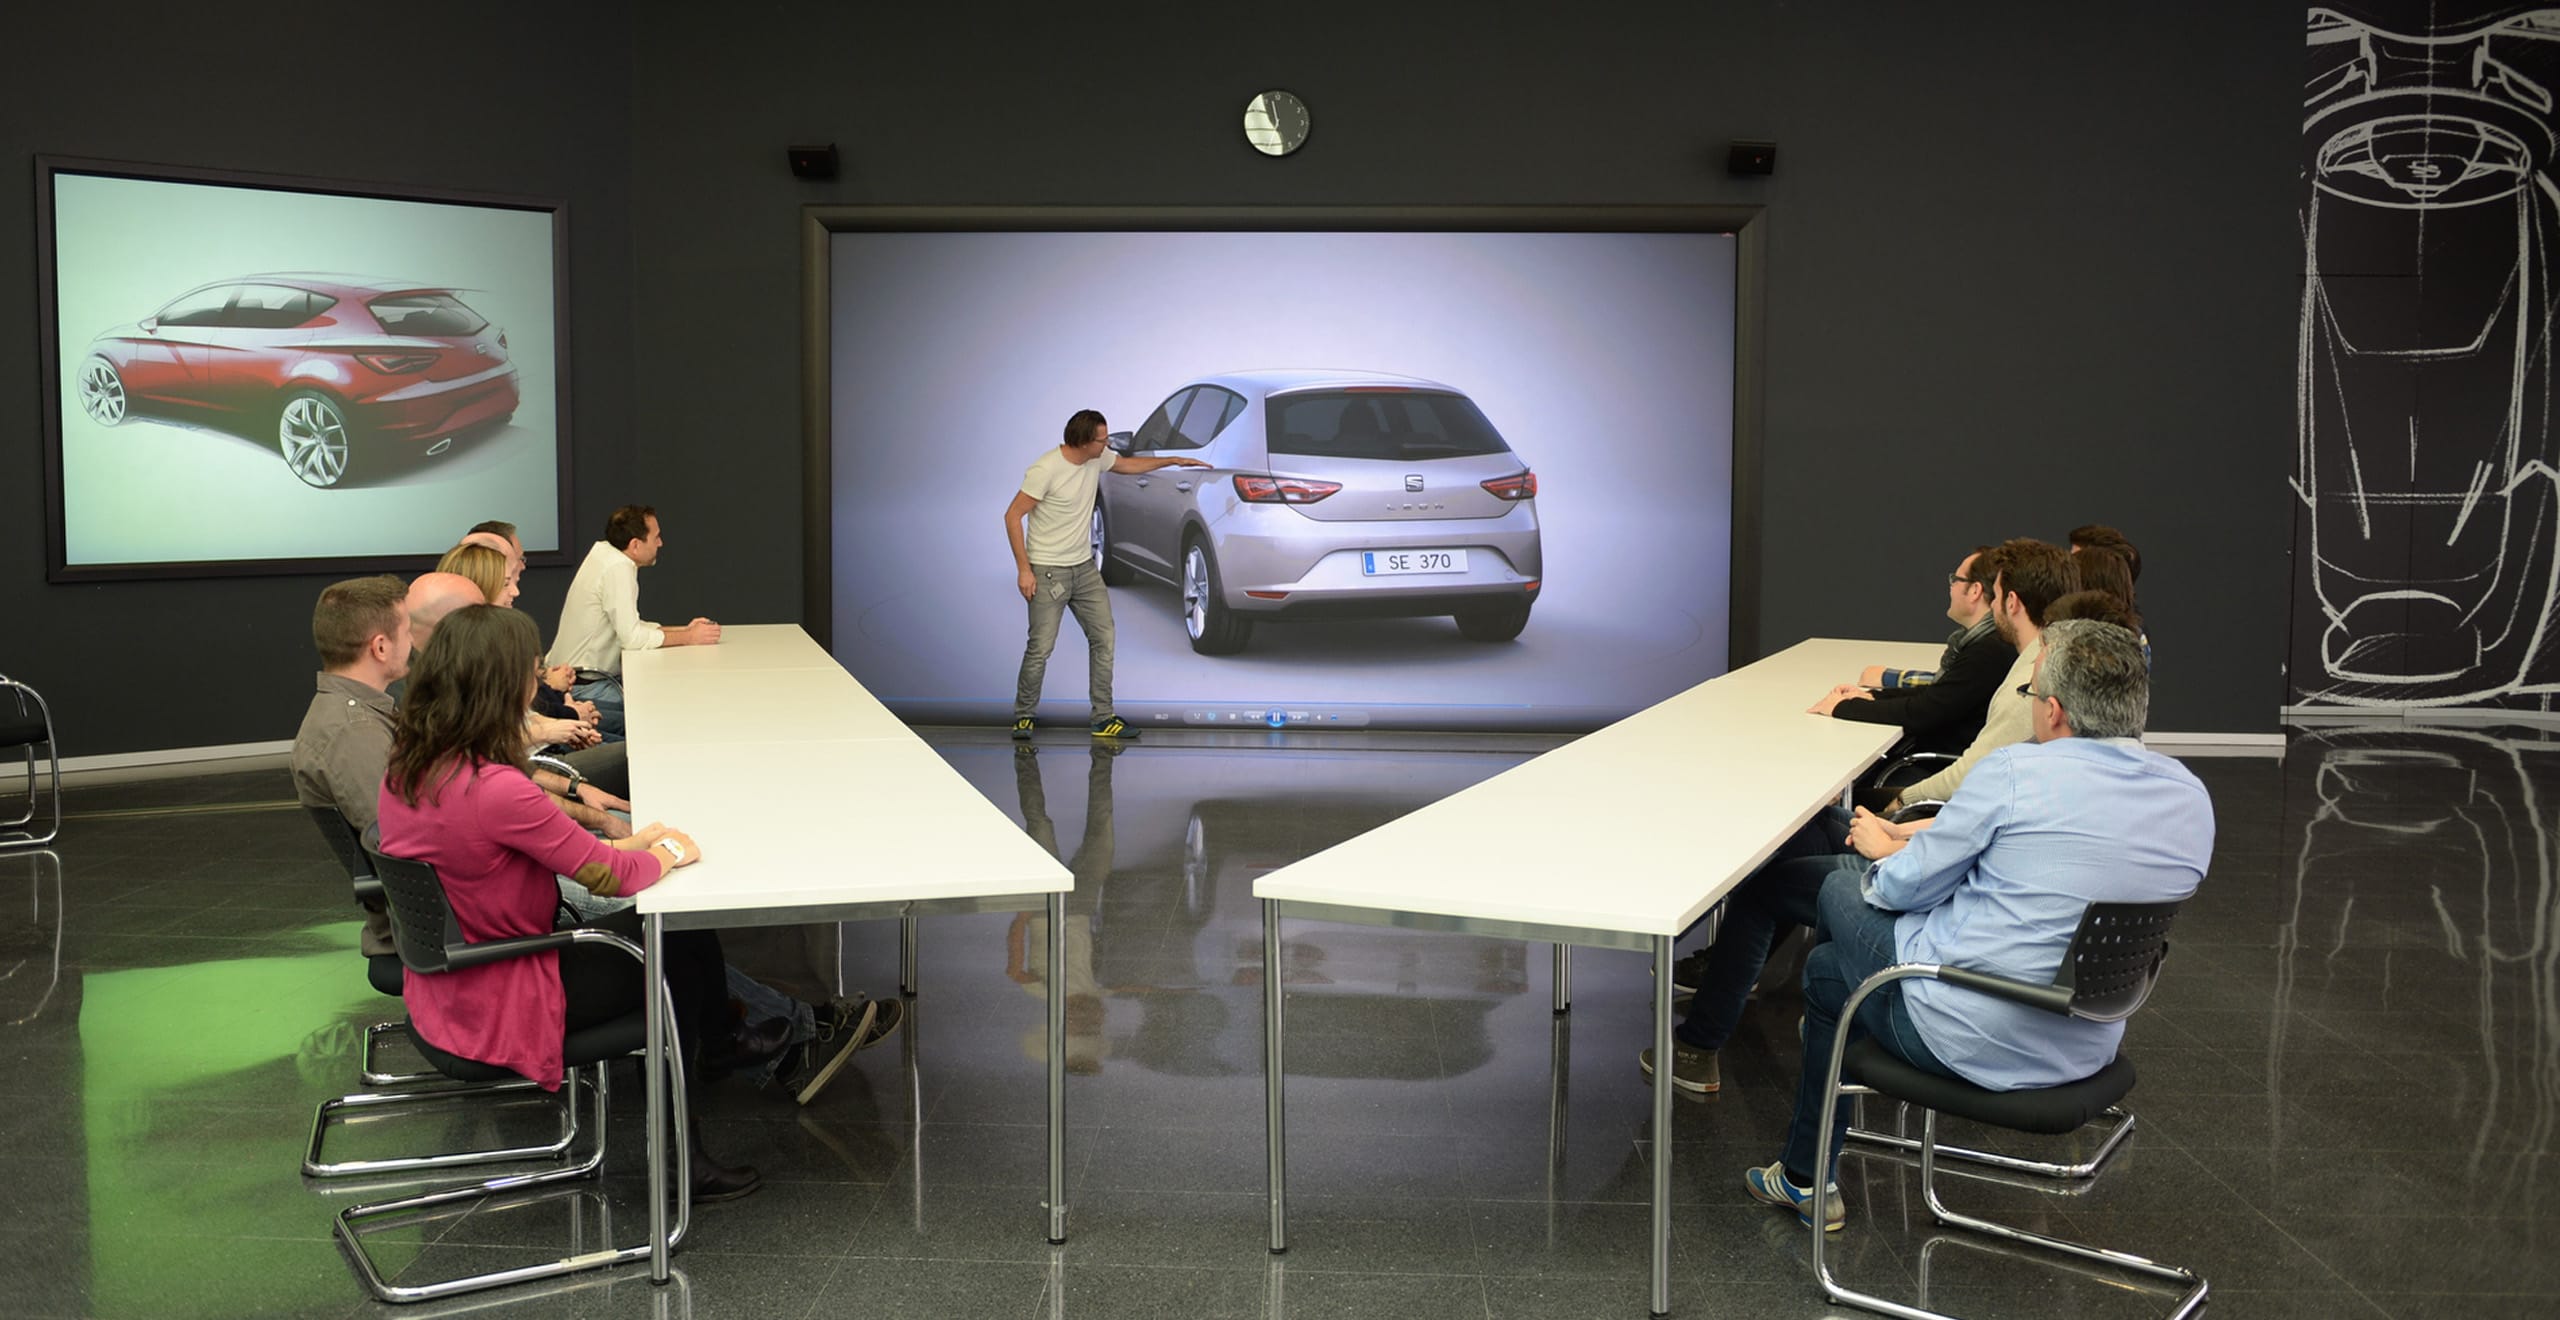 Roundtable discussion one man pointing at car design SEAT Leon with a group of people watching sitting at a table – SEAT Human Resources